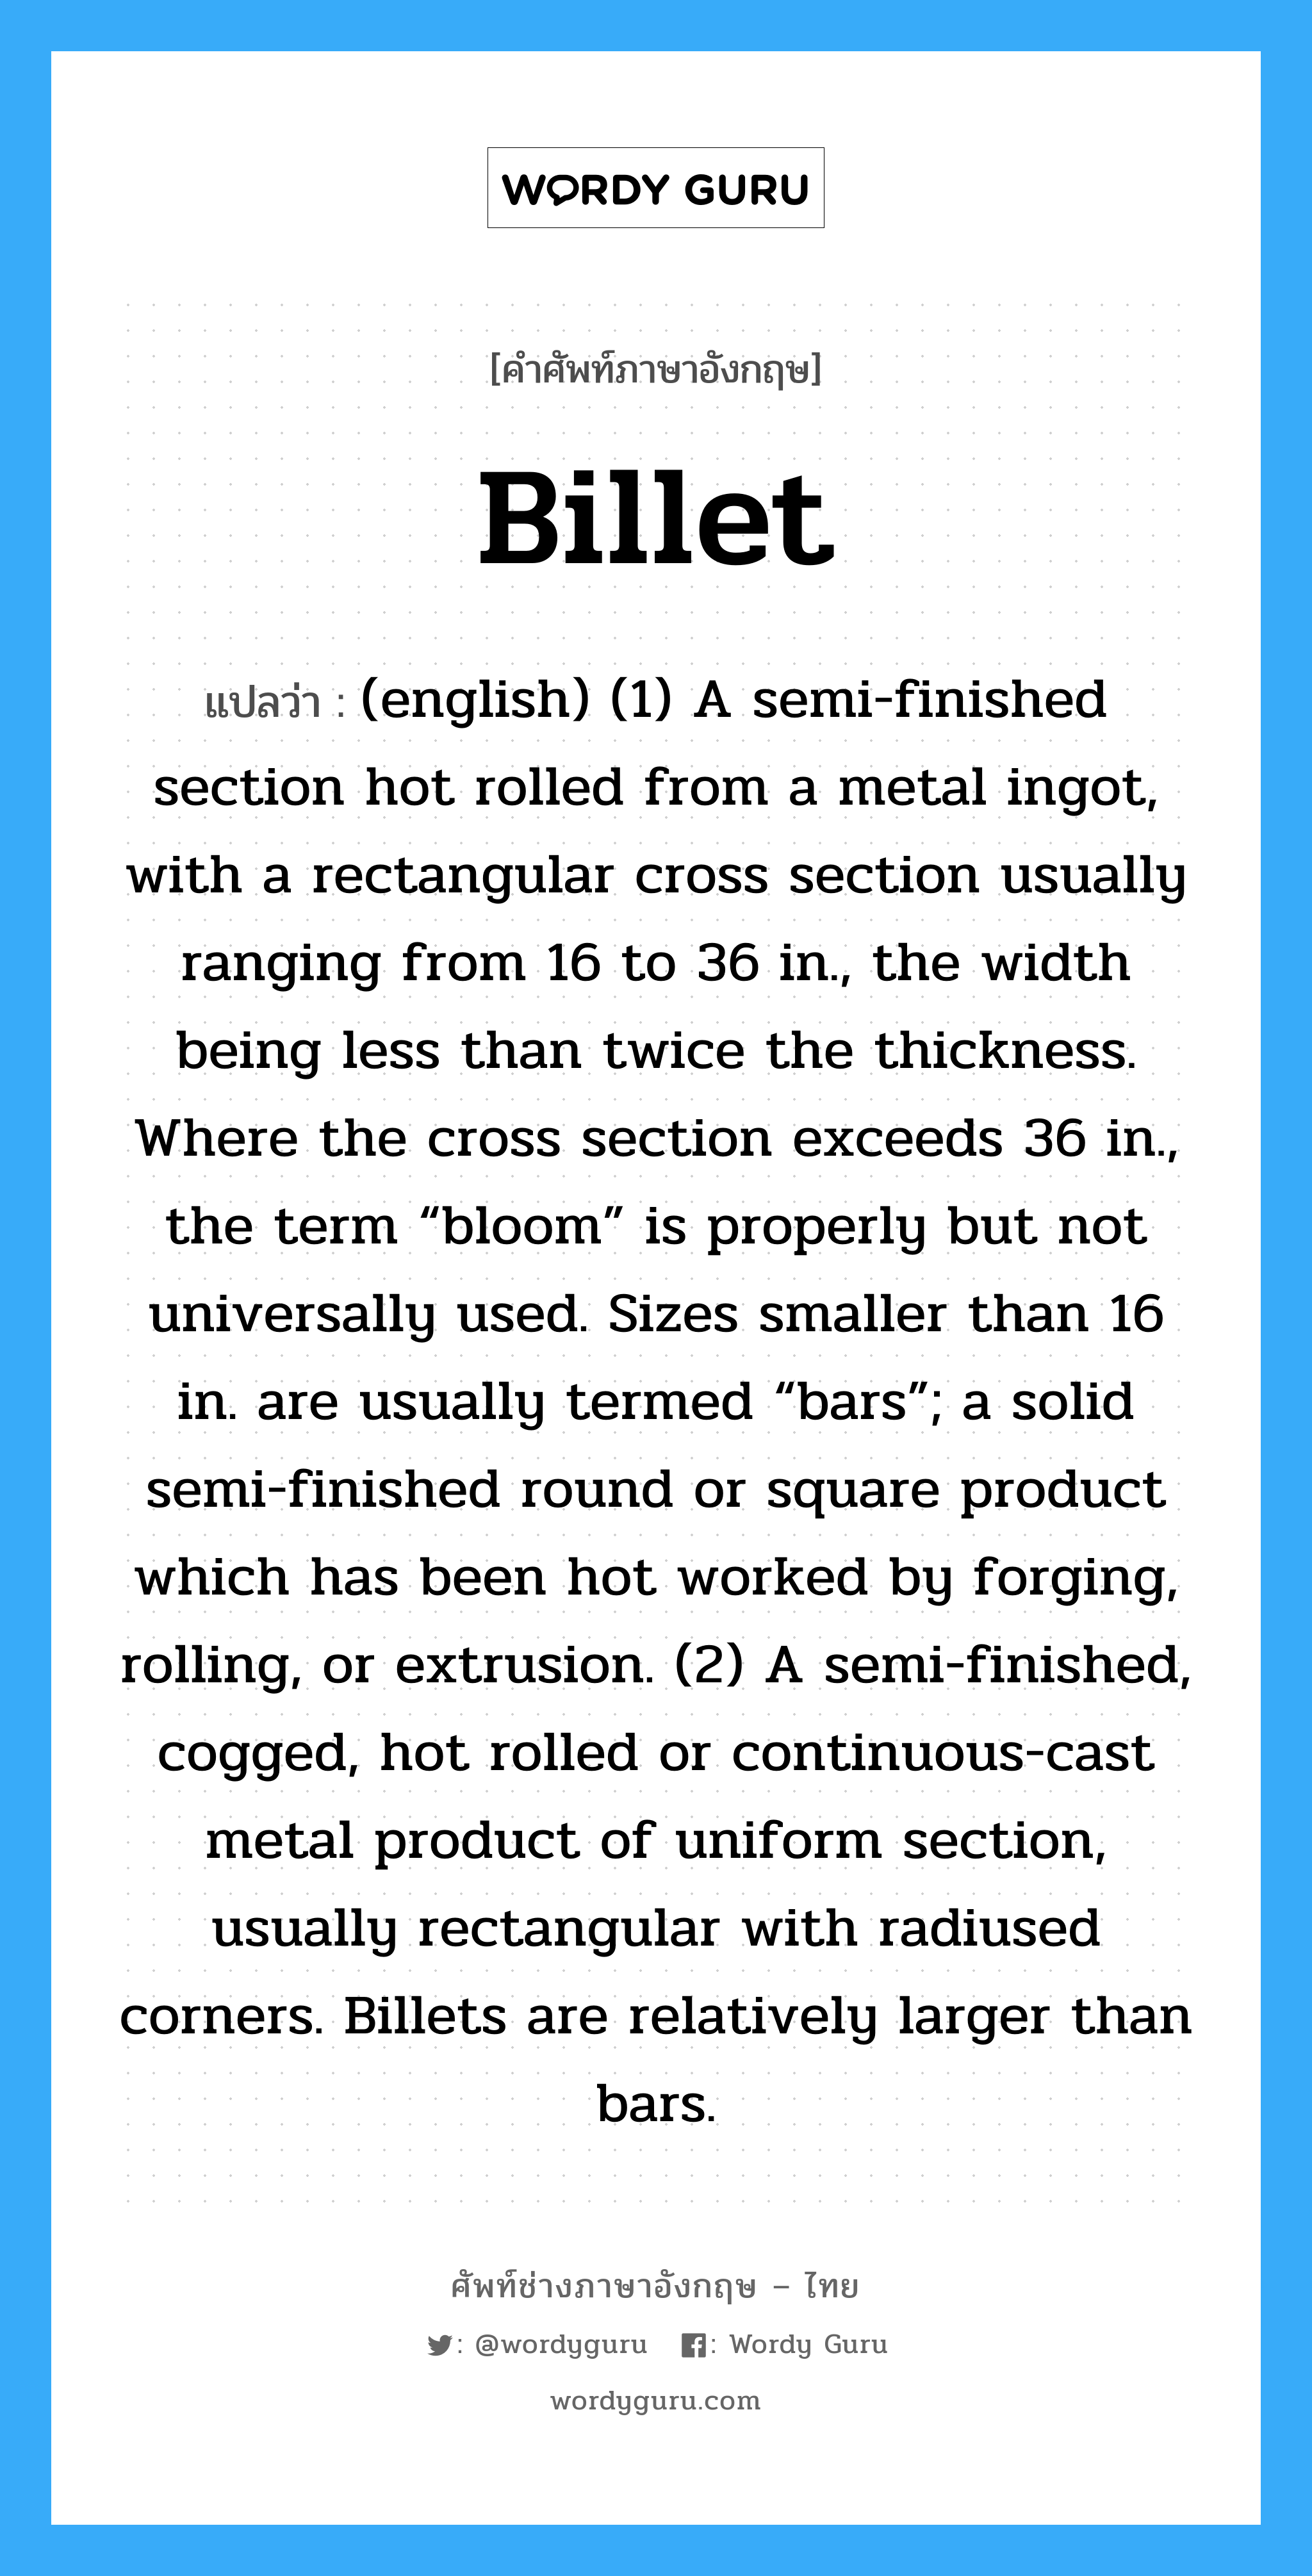 (english) (1) A semi-finished section hot rolled from a metal ingot, with a rectangular cross section usually ranging from 16 to 36 in., the width being less than twice the thickness. Where the cross section exceeds 36 in., the term “bloom” is properly but not universally used. Sizes smaller than 16 in. are usually termed “bars”; a solid semi-finished round or square product which has been hot worked by forging, rolling, or extrusion. (2) A semi-finished, cogged, hot rolled or continuous-cast metal product of uniform section, usually rectangular with radiused corners. Billets are relatively larger than bars. ภาษาอังกฤษ?, คำศัพท์ช่างภาษาอังกฤษ - ไทย (english) (1) A semi-finished section hot rolled from a metal ingot, with a rectangular cross section usually ranging from 16 to 36 in., the width being less than twice the thickness. Where the cross section exceeds 36 in., the term “bloom” is properly but not universally used. Sizes smaller than 16 in. are usually termed “bars”; a solid semi-finished round or square product which has been hot worked by forging, rolling, or extrusion. (2) A semi-finished, cogged, hot rolled or continuous-cast metal product of uniform section, usually rectangular with radiused corners. Billets are relatively larger than bars. คำศัพท์ภาษาอังกฤษ (english) (1) A semi-finished section hot rolled from a metal ingot, with a rectangular cross section usually ranging from 16 to 36 in., the width being less than twice the thickness. Where the cross section exceeds 36 in., the term “bloom” is properly but not universally used. Sizes smaller than 16 in. are usually termed “bars”; a solid semi-finished round or square product which has been hot worked by forging, rolling, or extrusion. (2) A semi-finished, cogged, hot rolled or continuous-cast metal product of uniform section, usually rectangular with radiused corners. Billets are relatively larger than bars. แปลว่า Billet